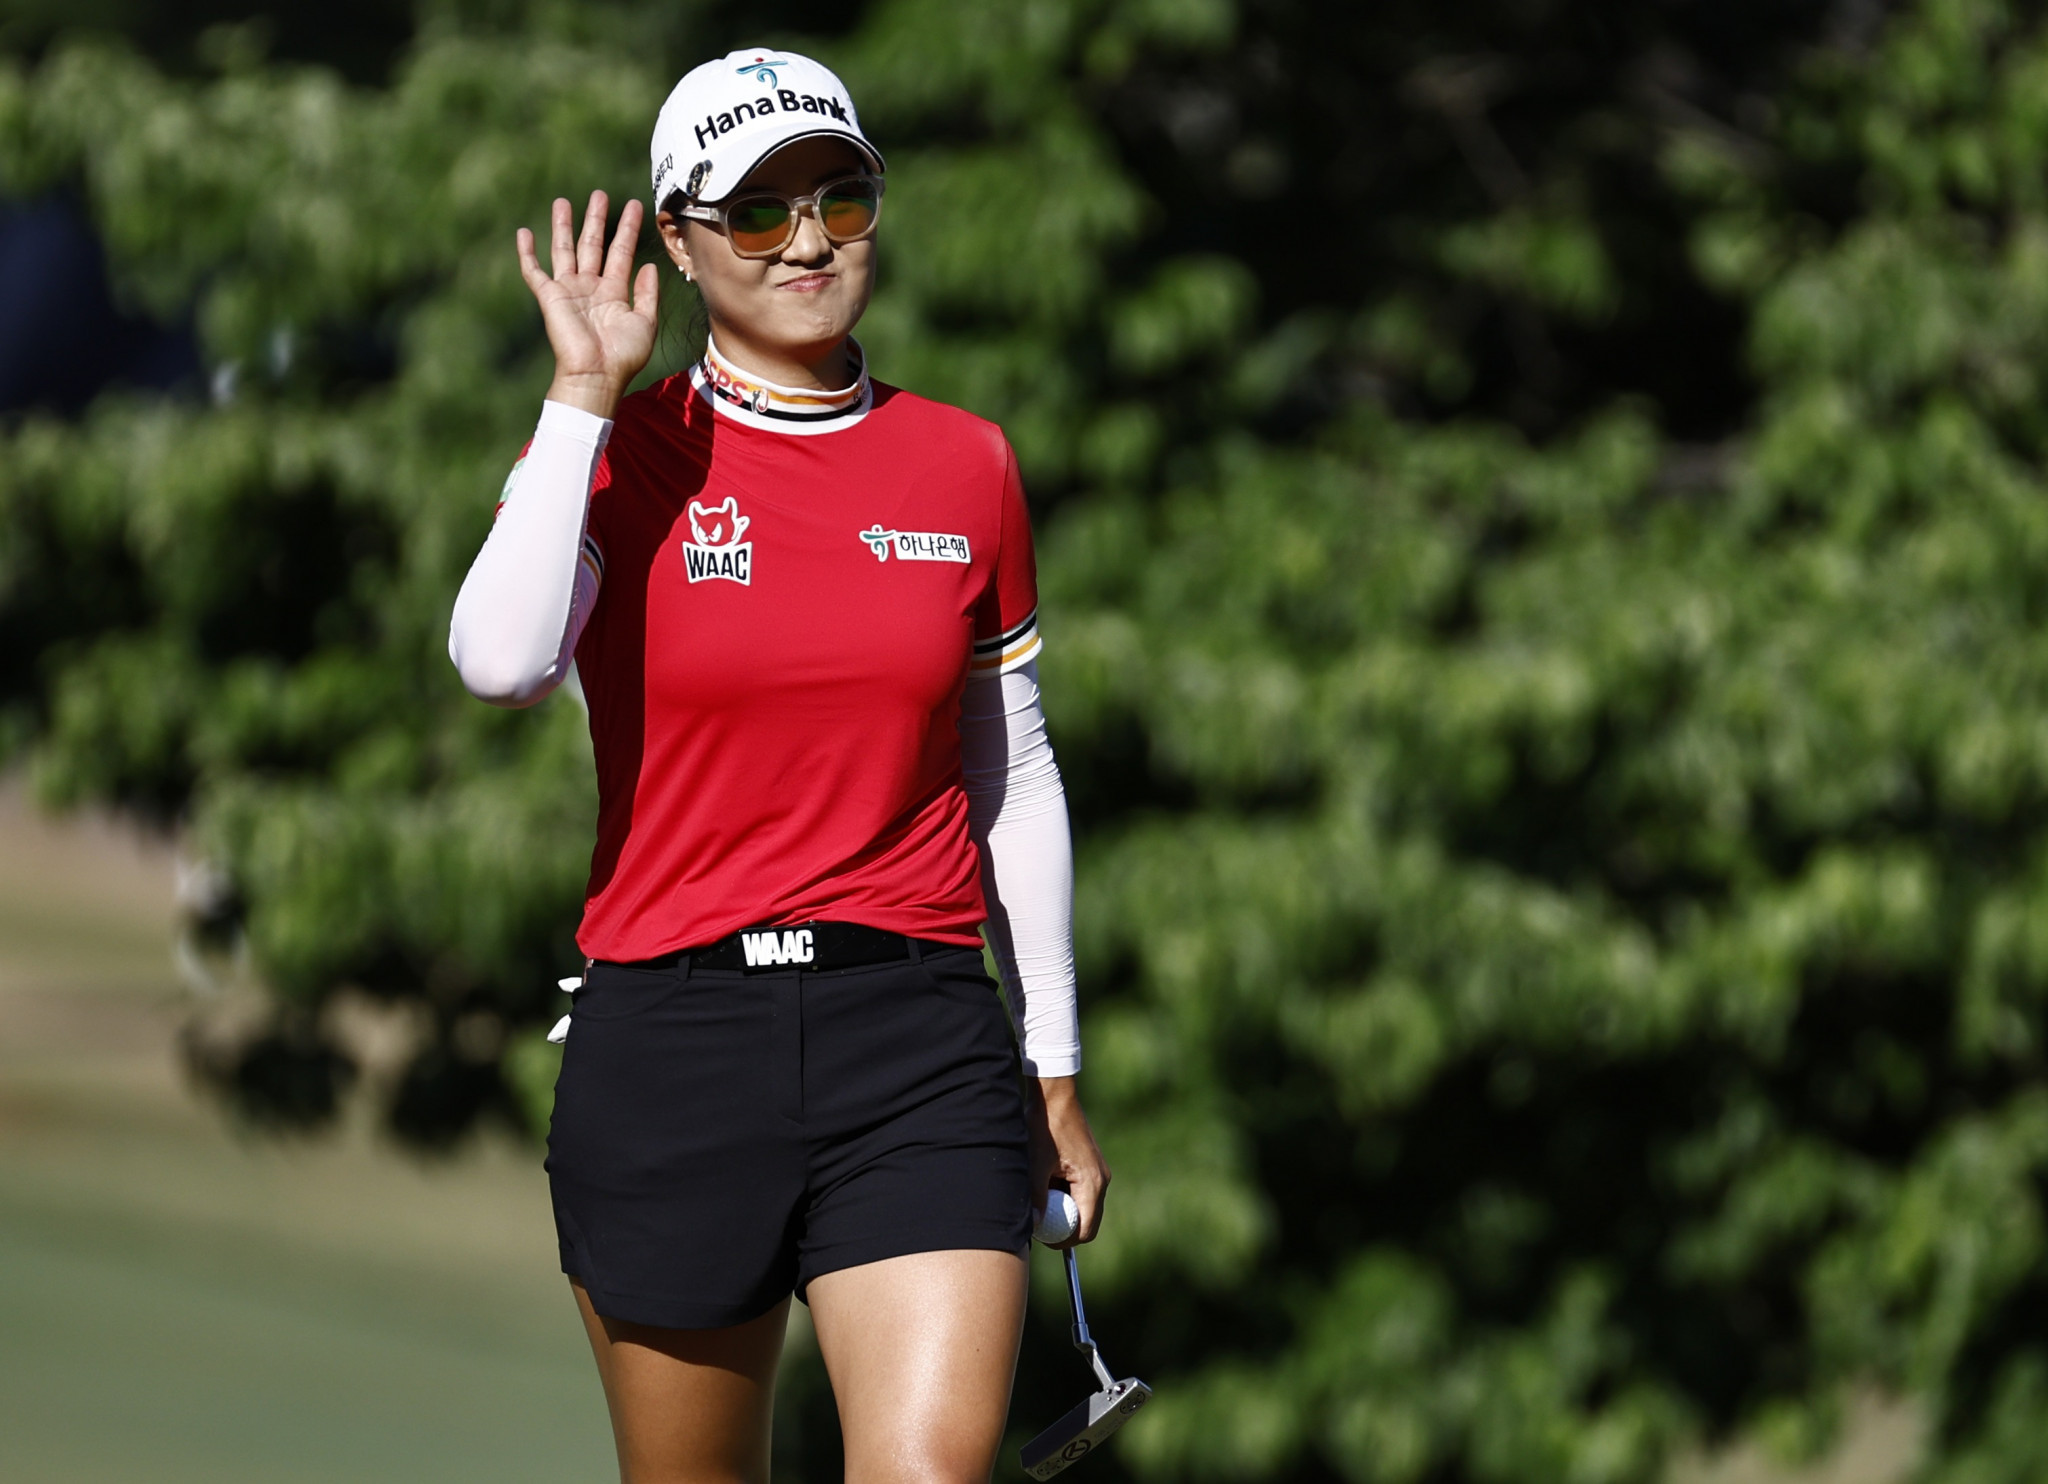 Lee holds three-shot lead at US Women’s Open with one round to go